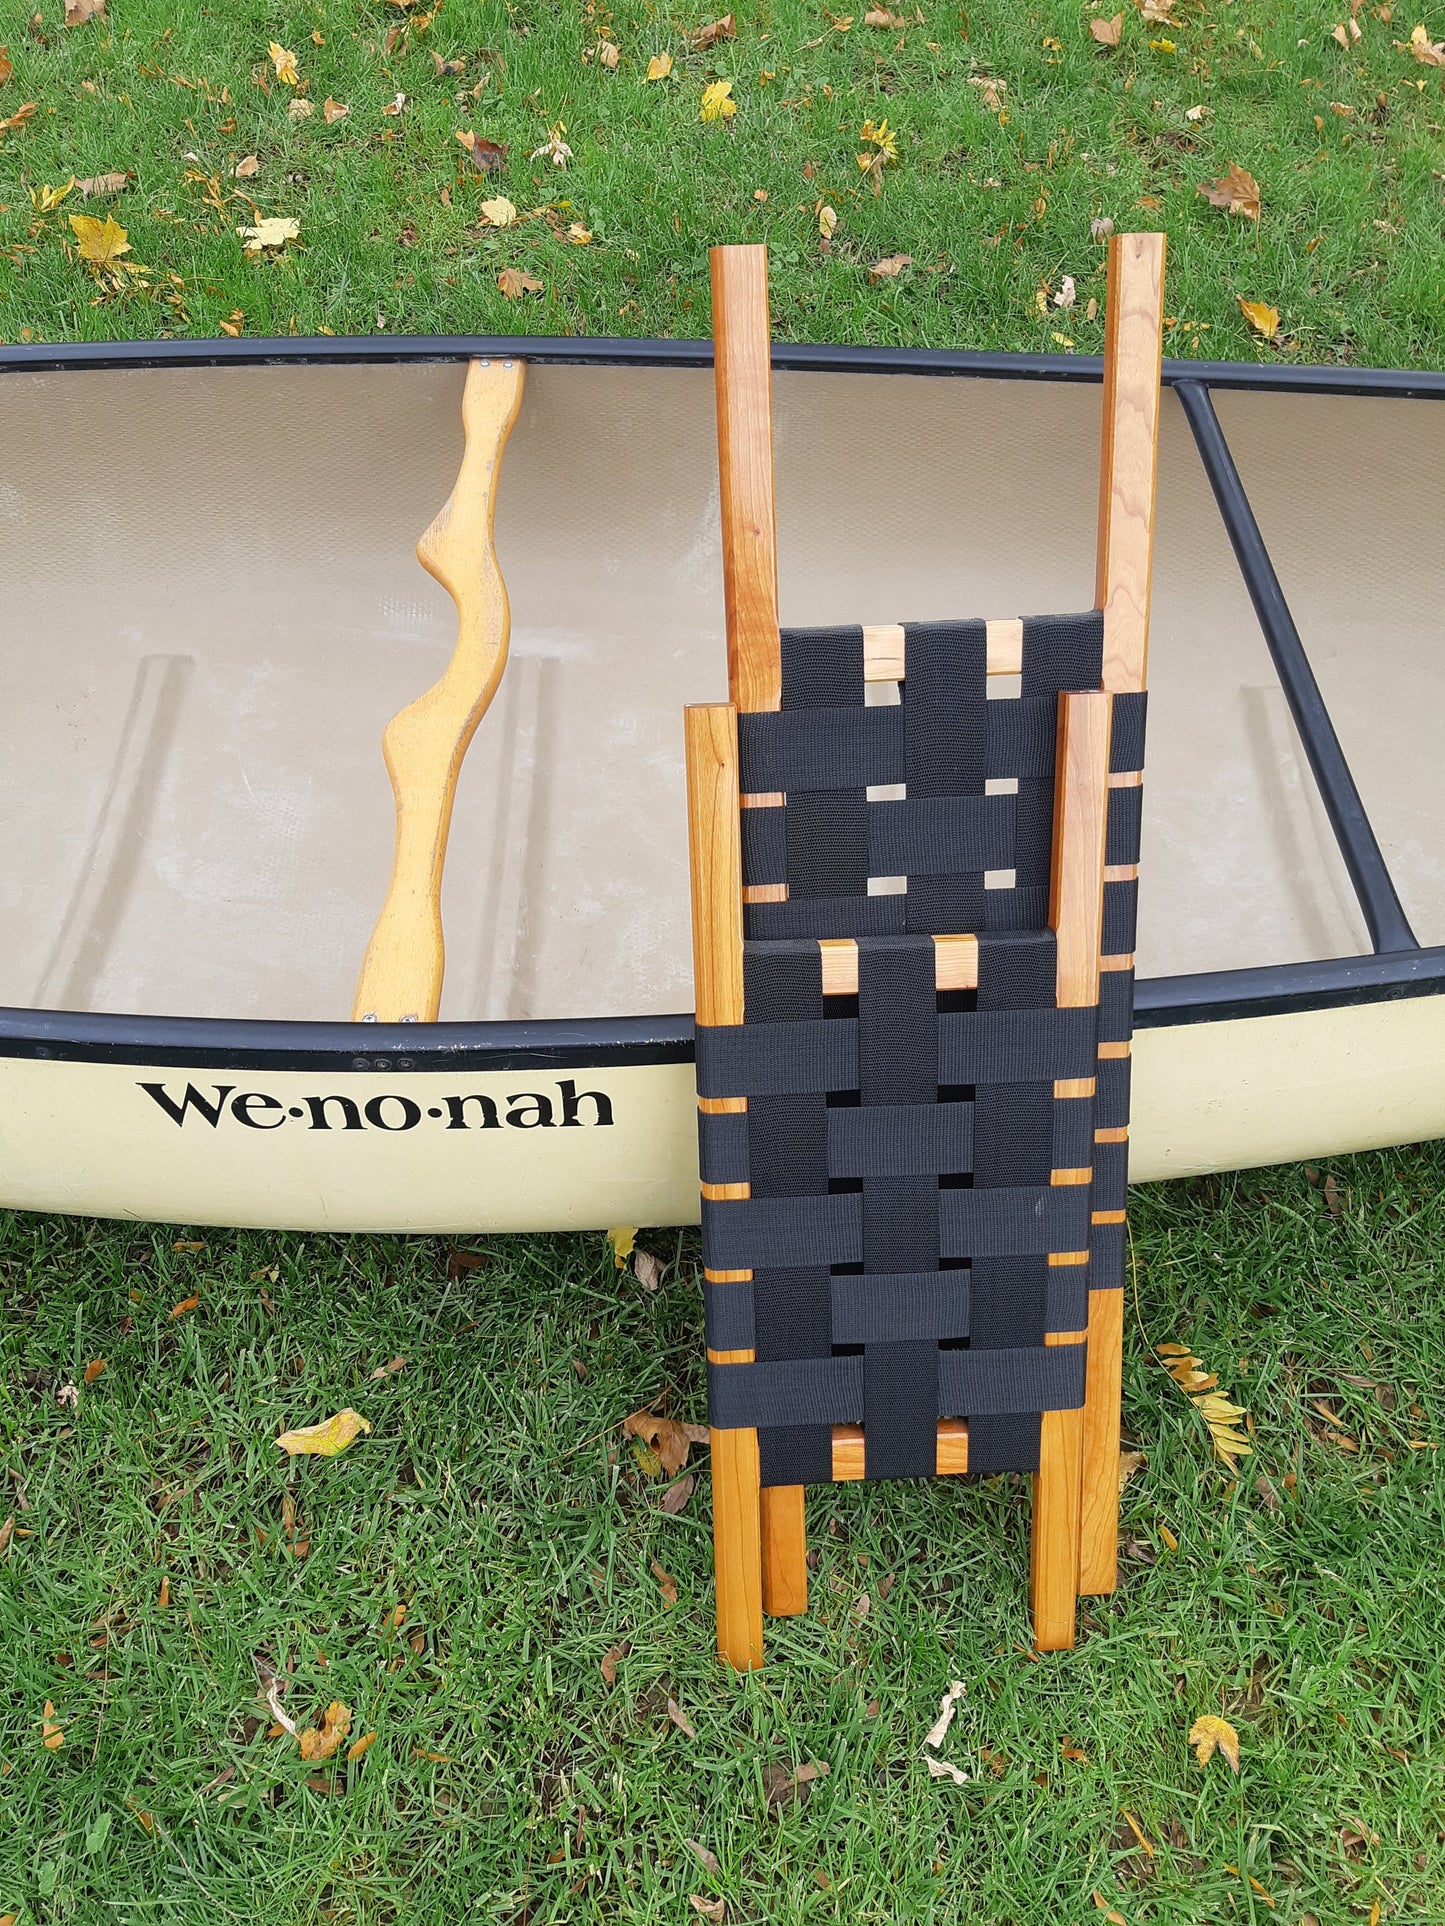 LIMITED: STERN CANOE SEAT: Stern webbed seats available in ash and cherry. Length: 27" (trim to fit your desired length) - FOR SALE